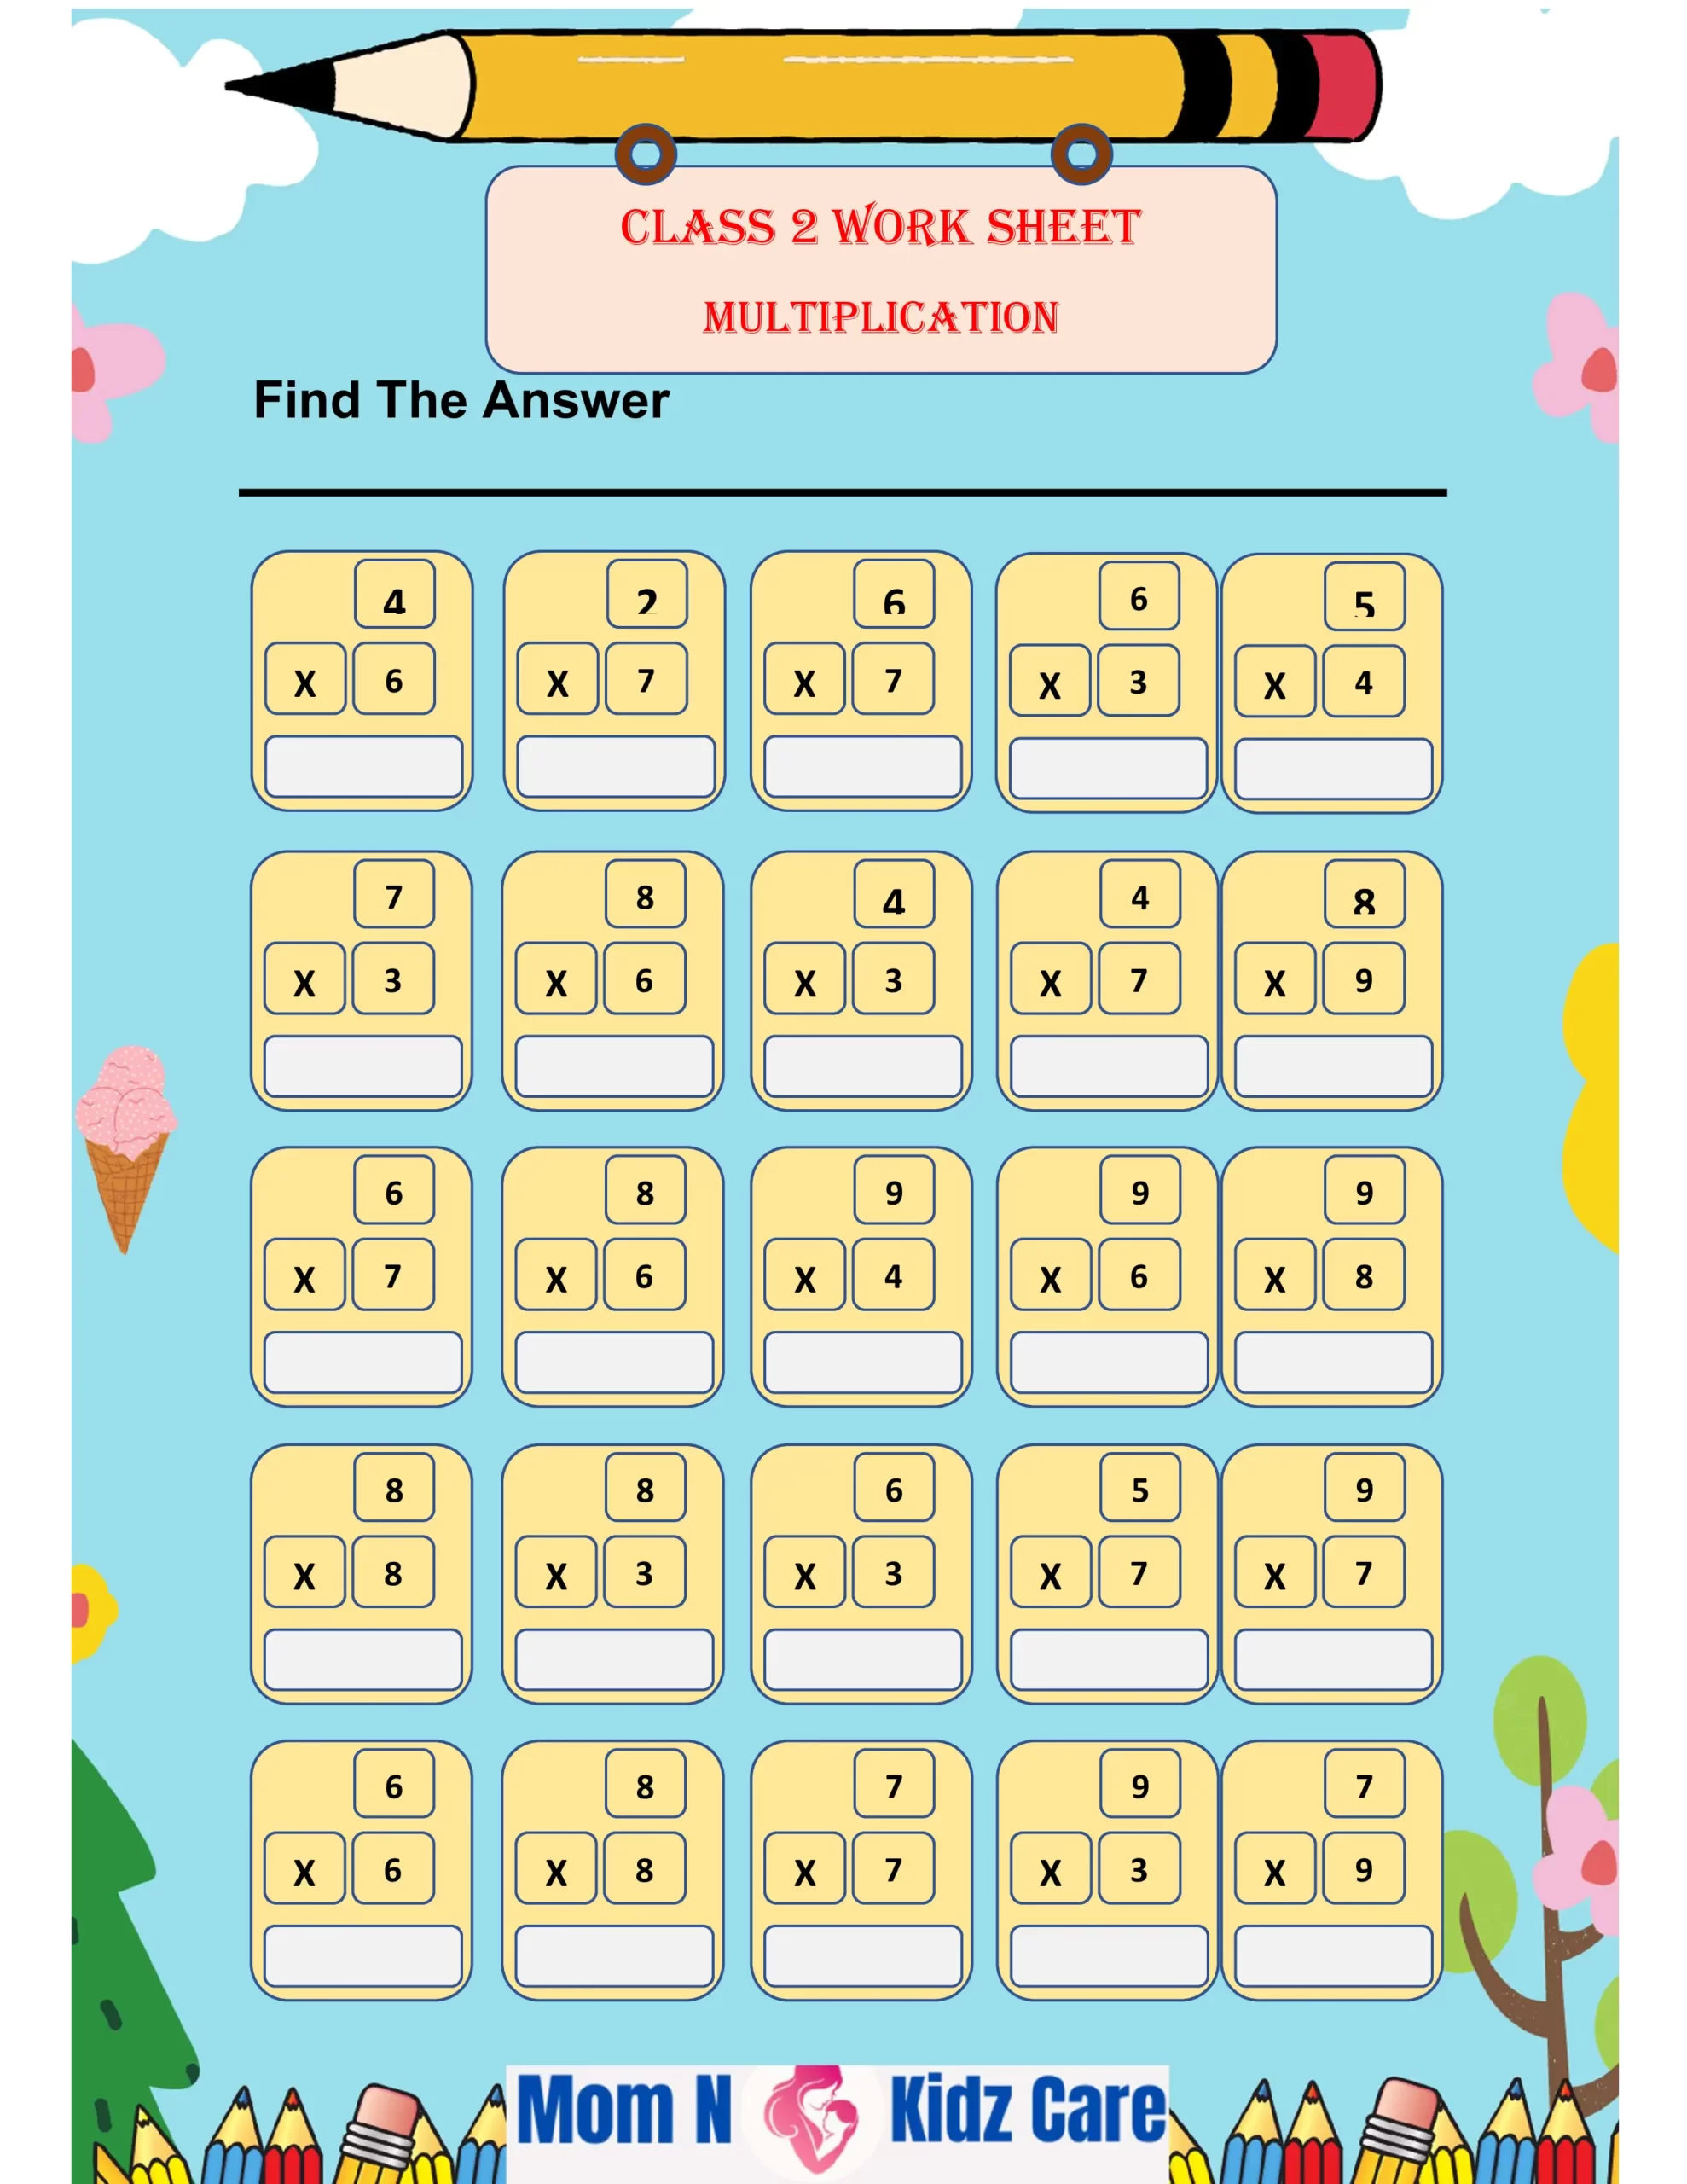 Kids Class 2 Work Sheet-2 for Multiplication of Numbers Download